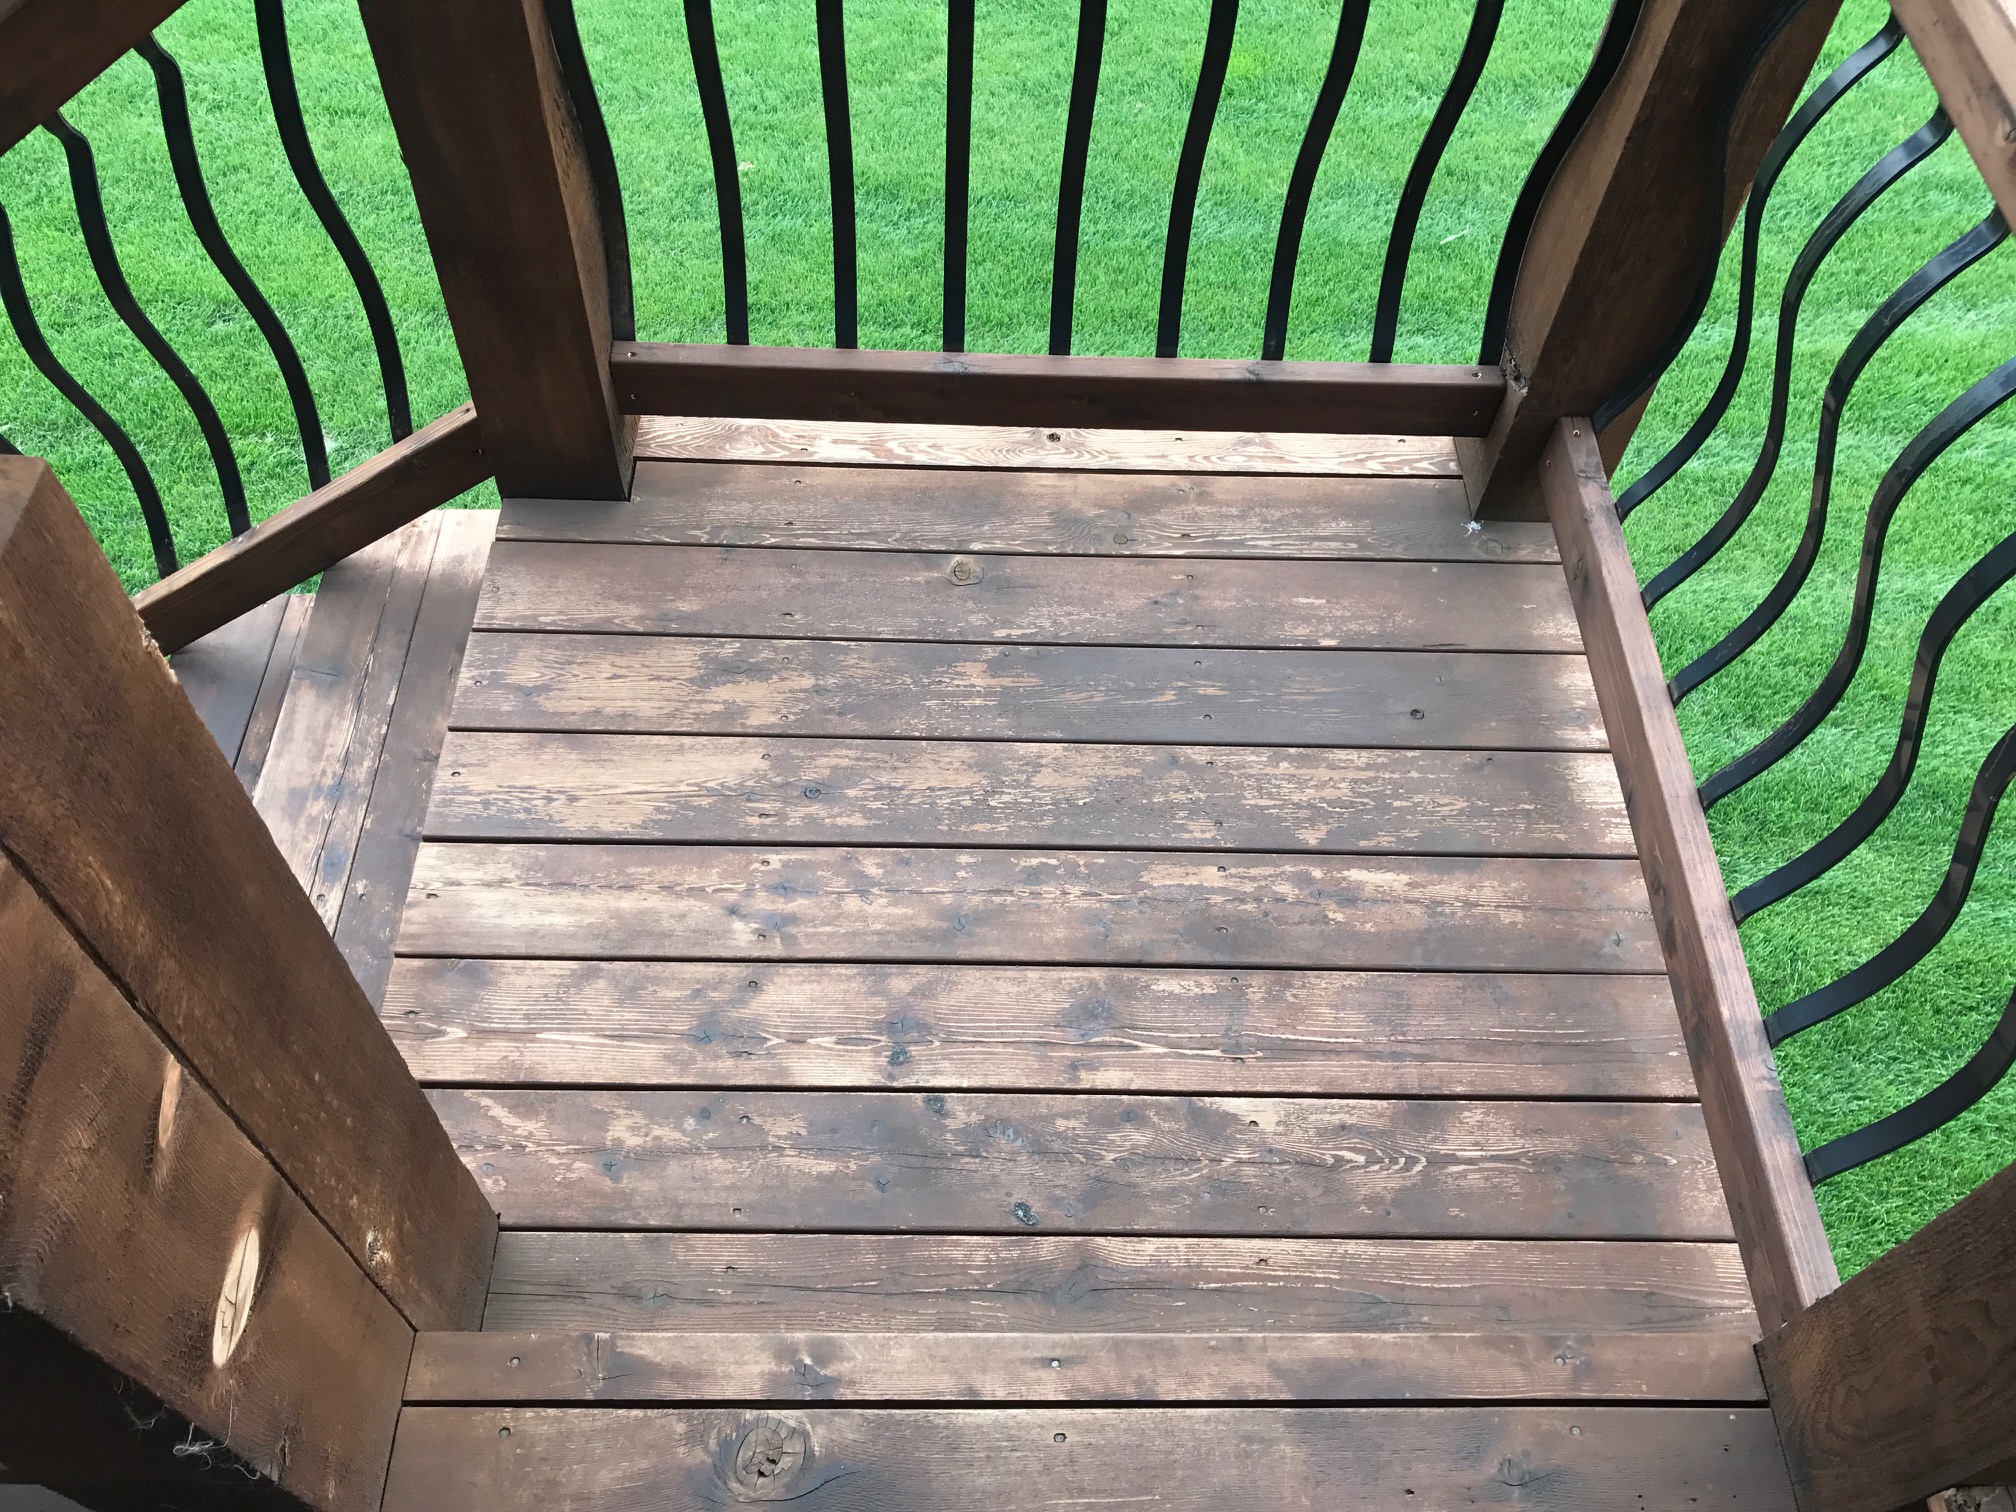 More patchy and flaking off stain.